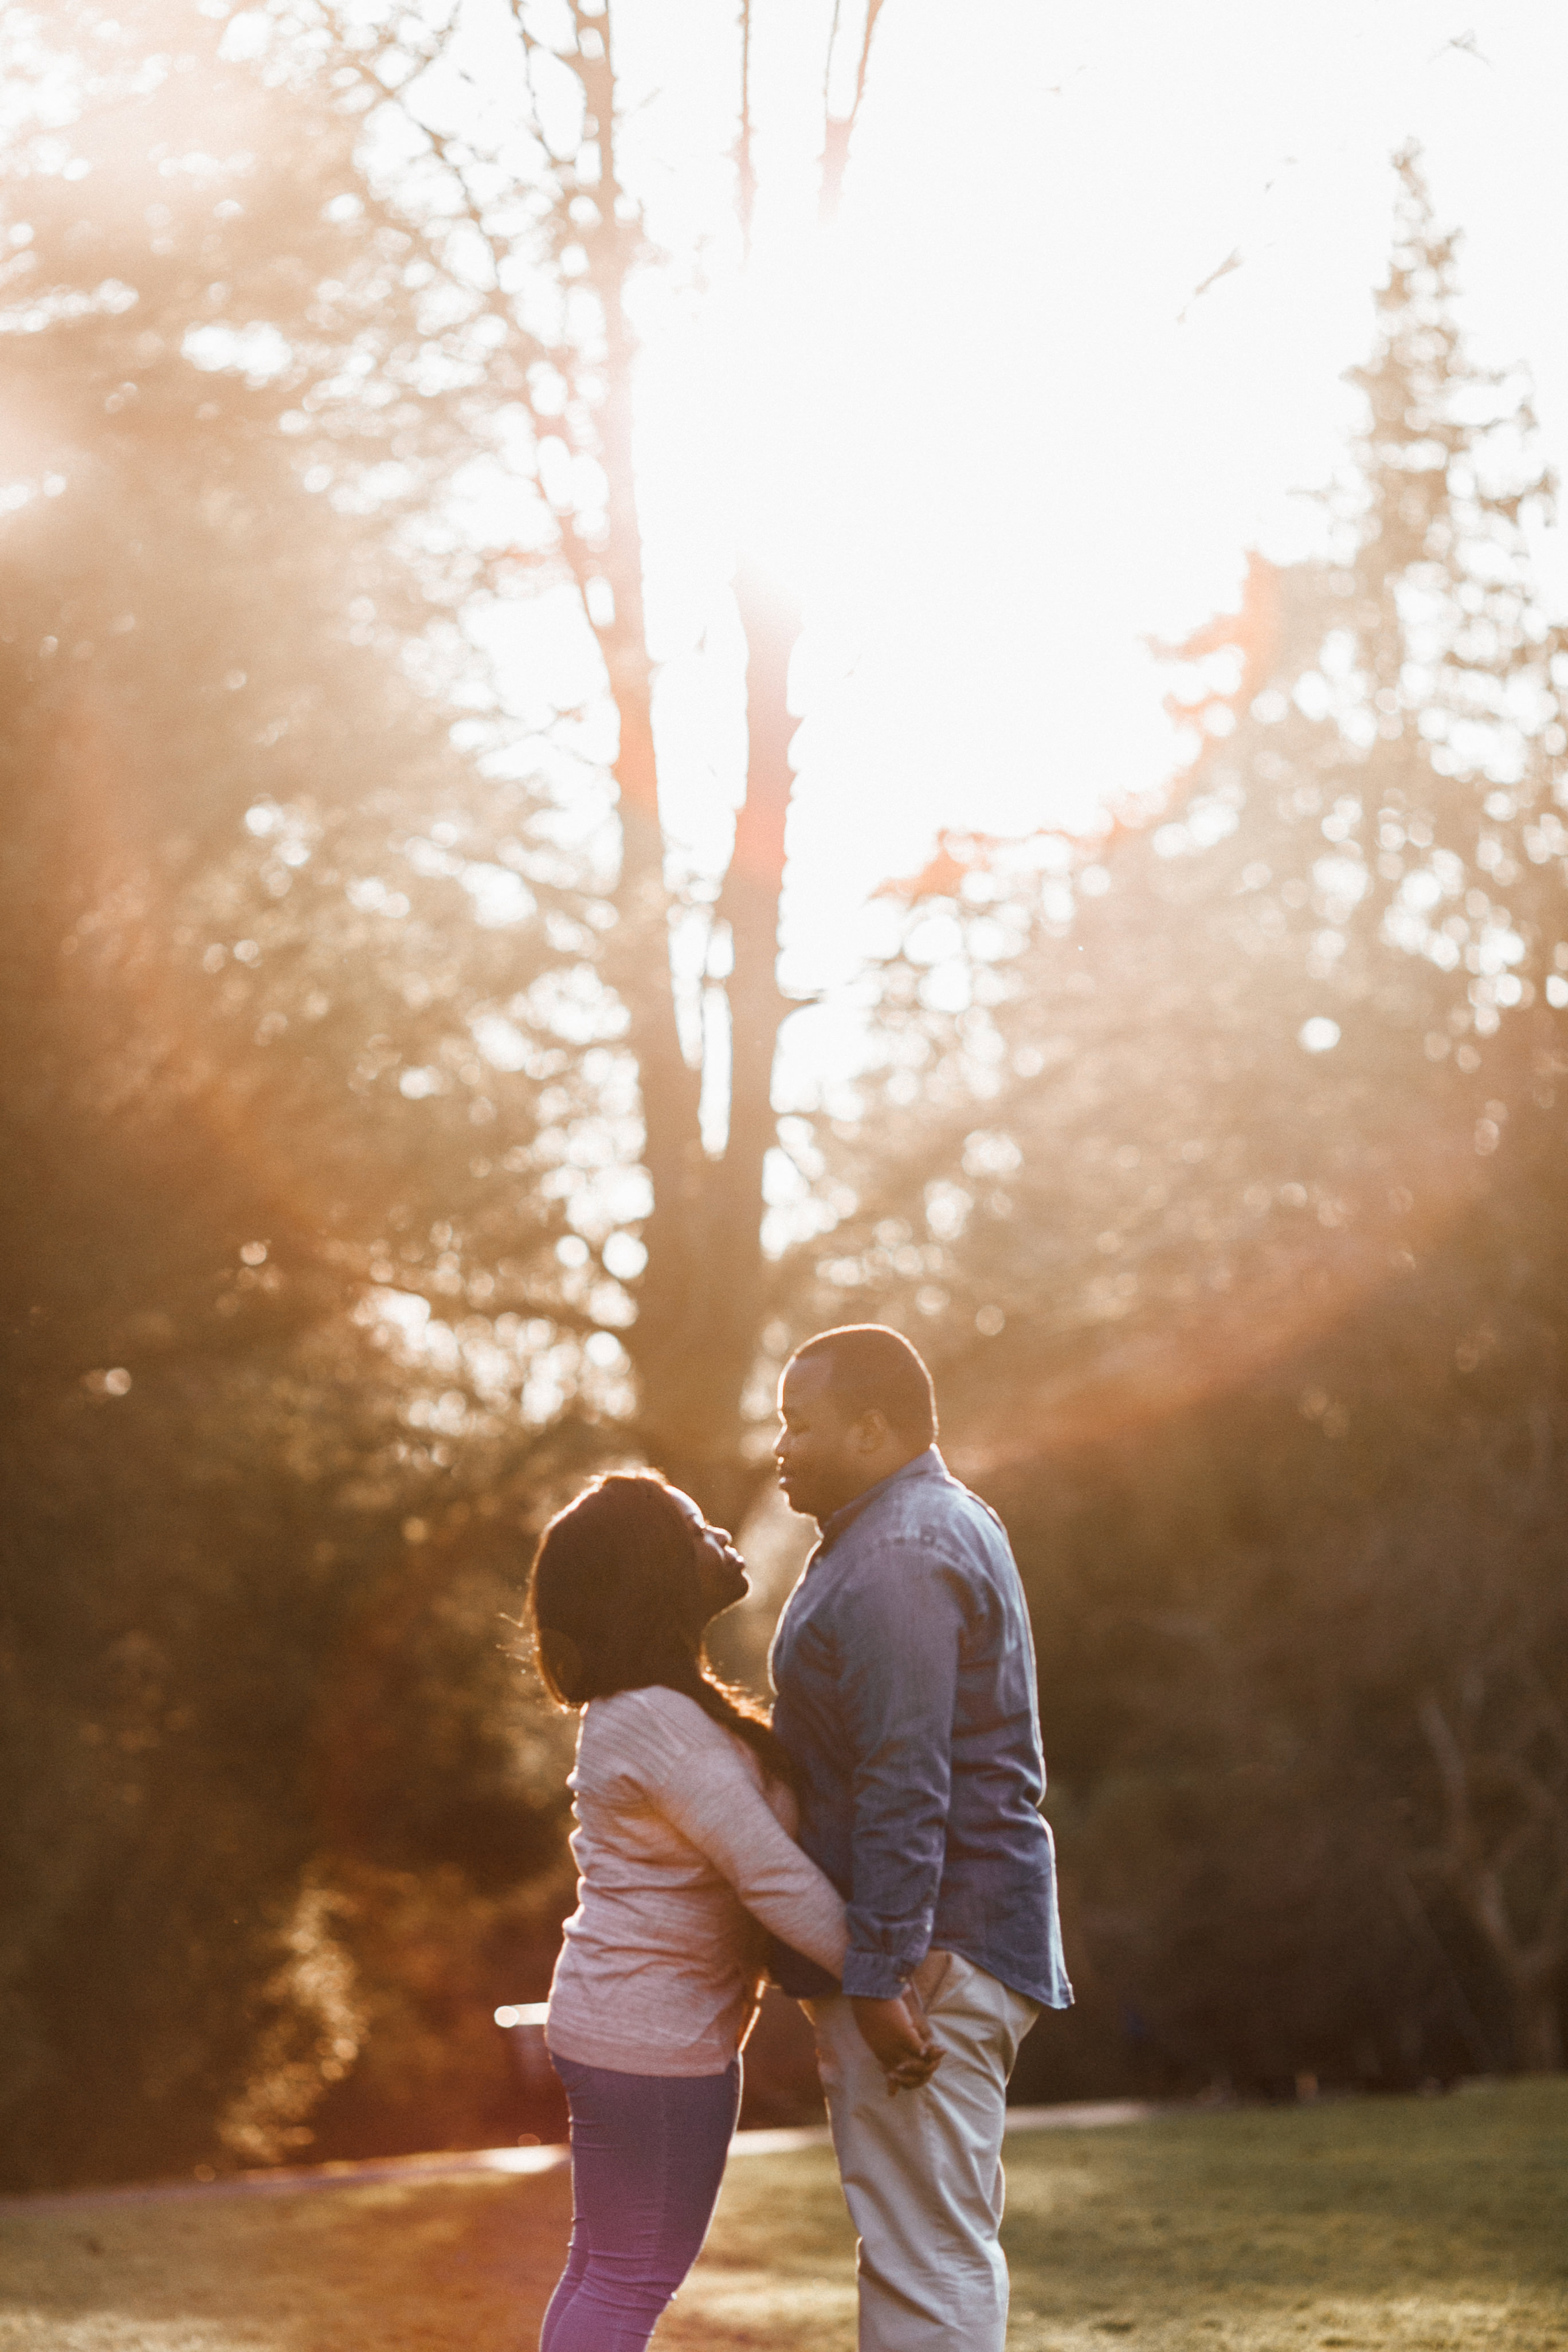 alexandra park sunset and sunrise engagement shoot at victoria park in bath uk by somerset wedding photographer beatrici